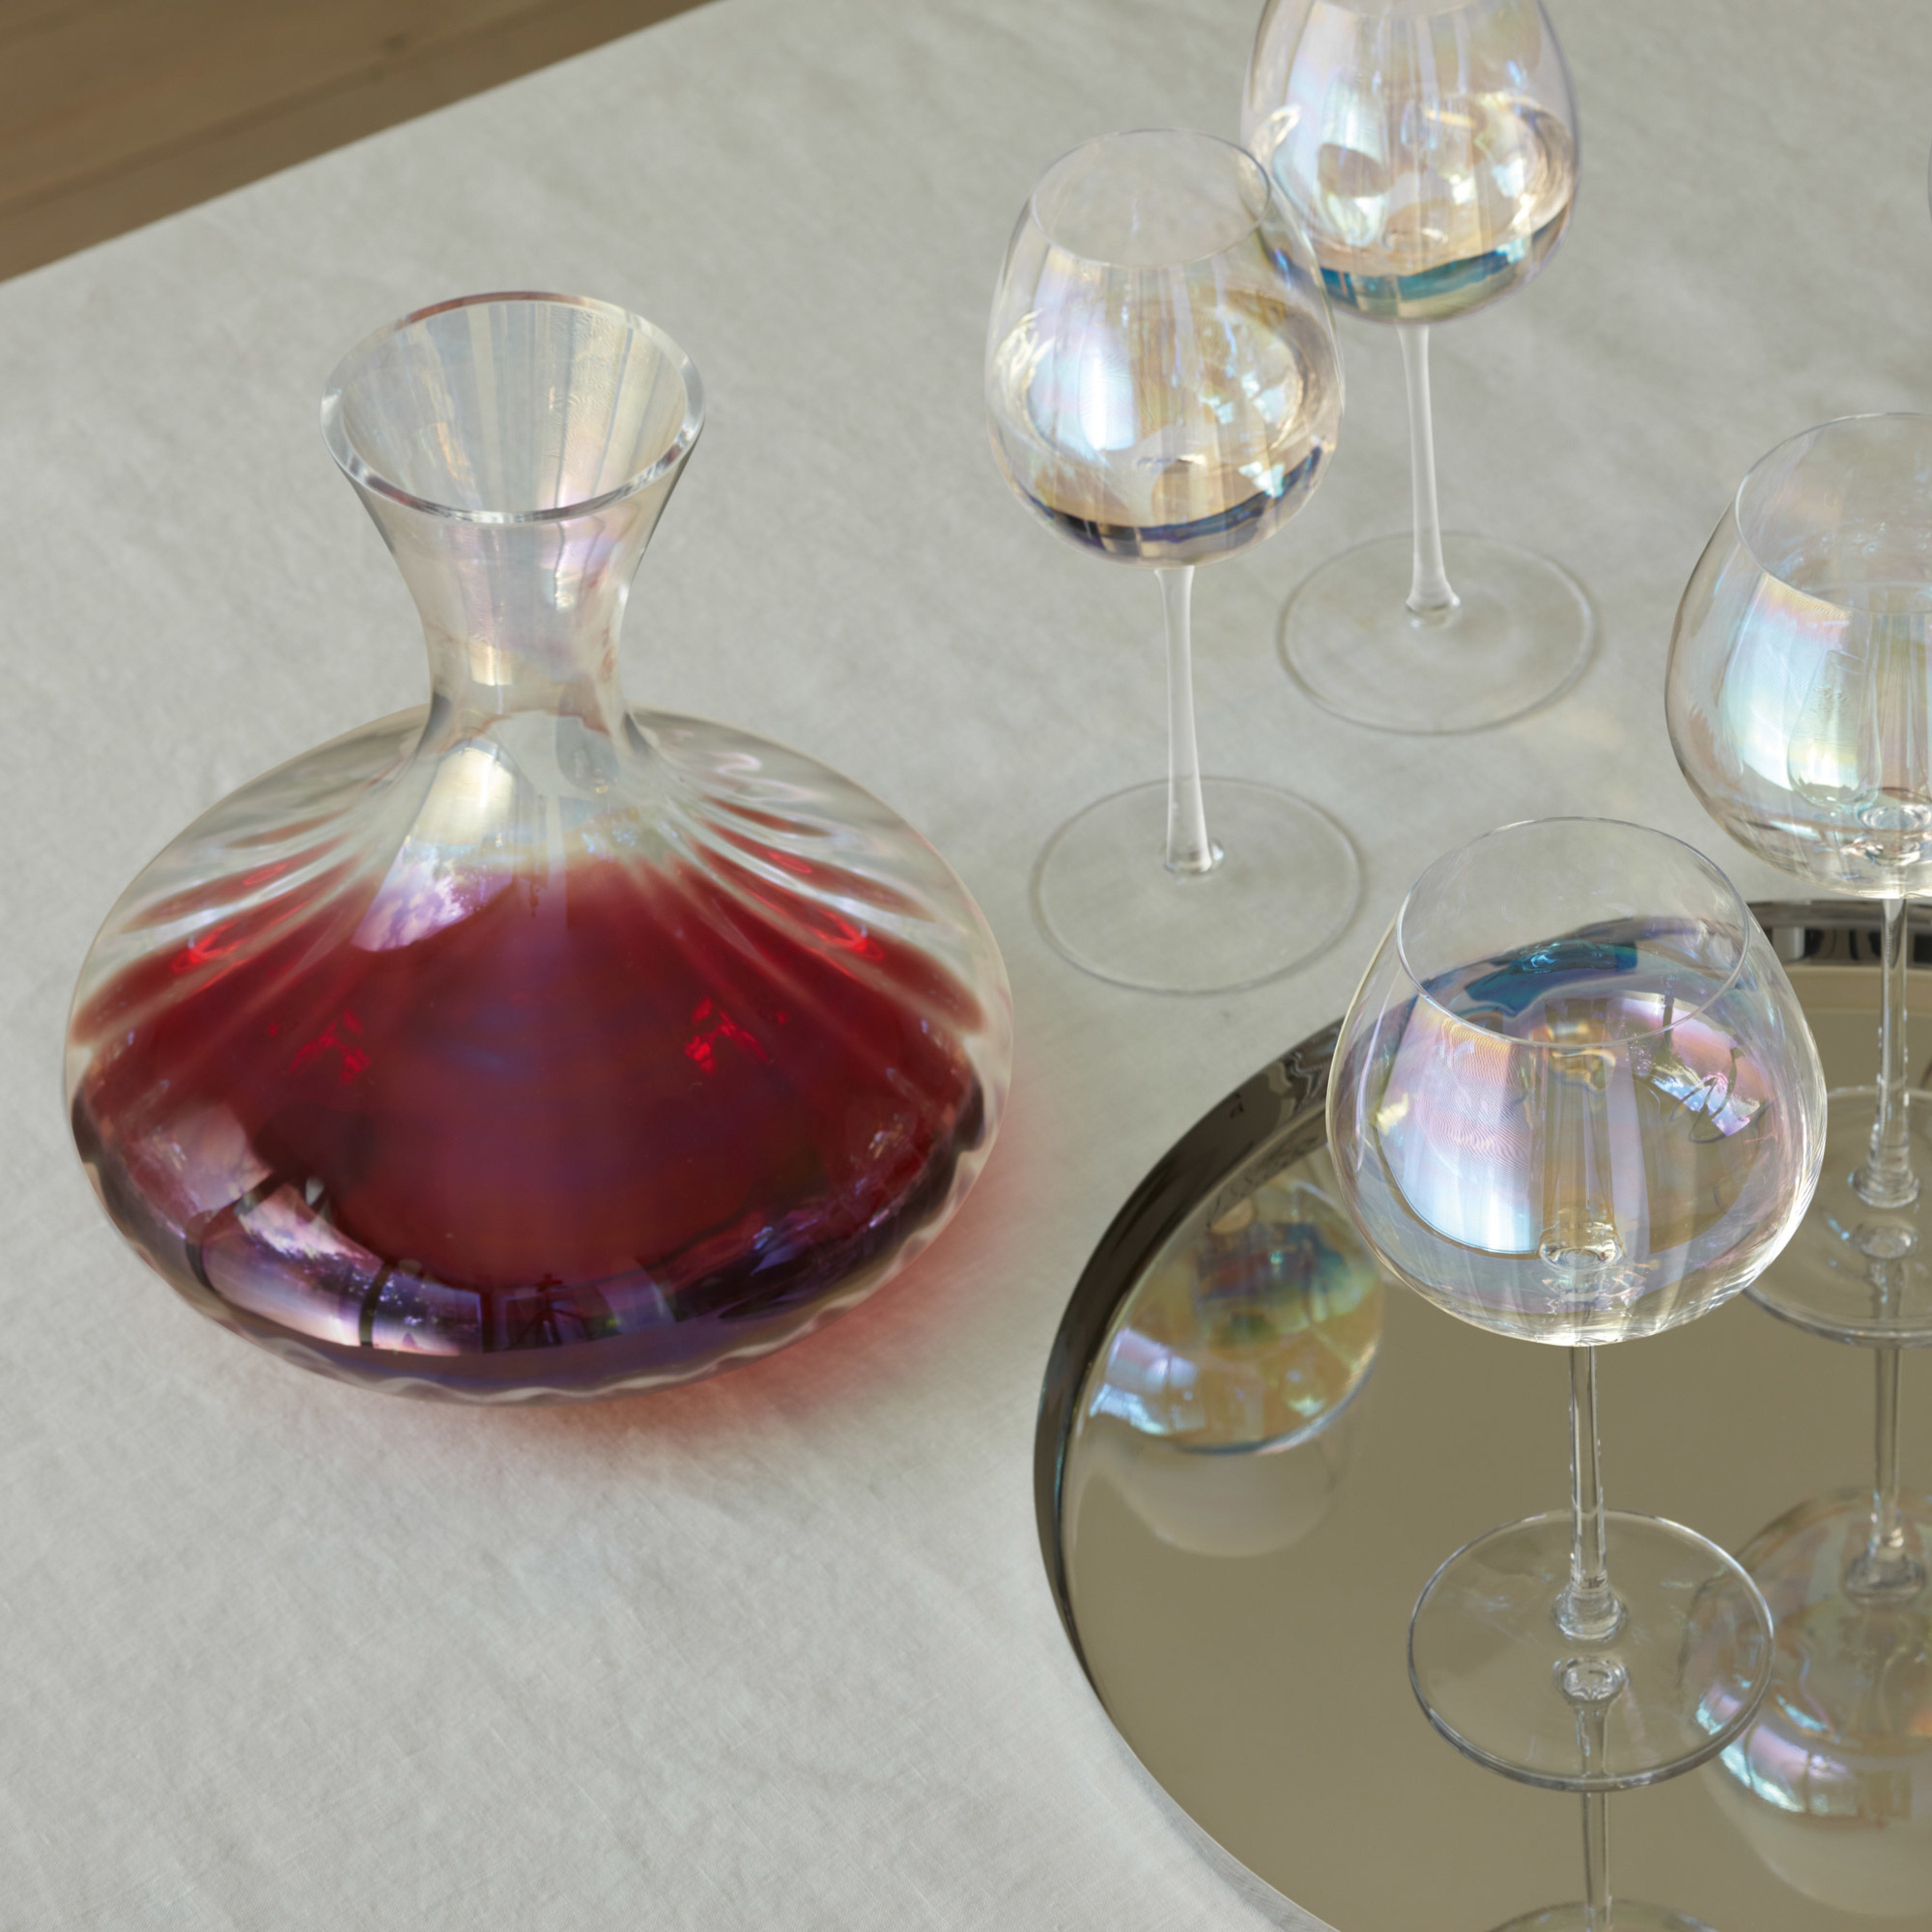 LSA’s Pearl collection of wine glasses